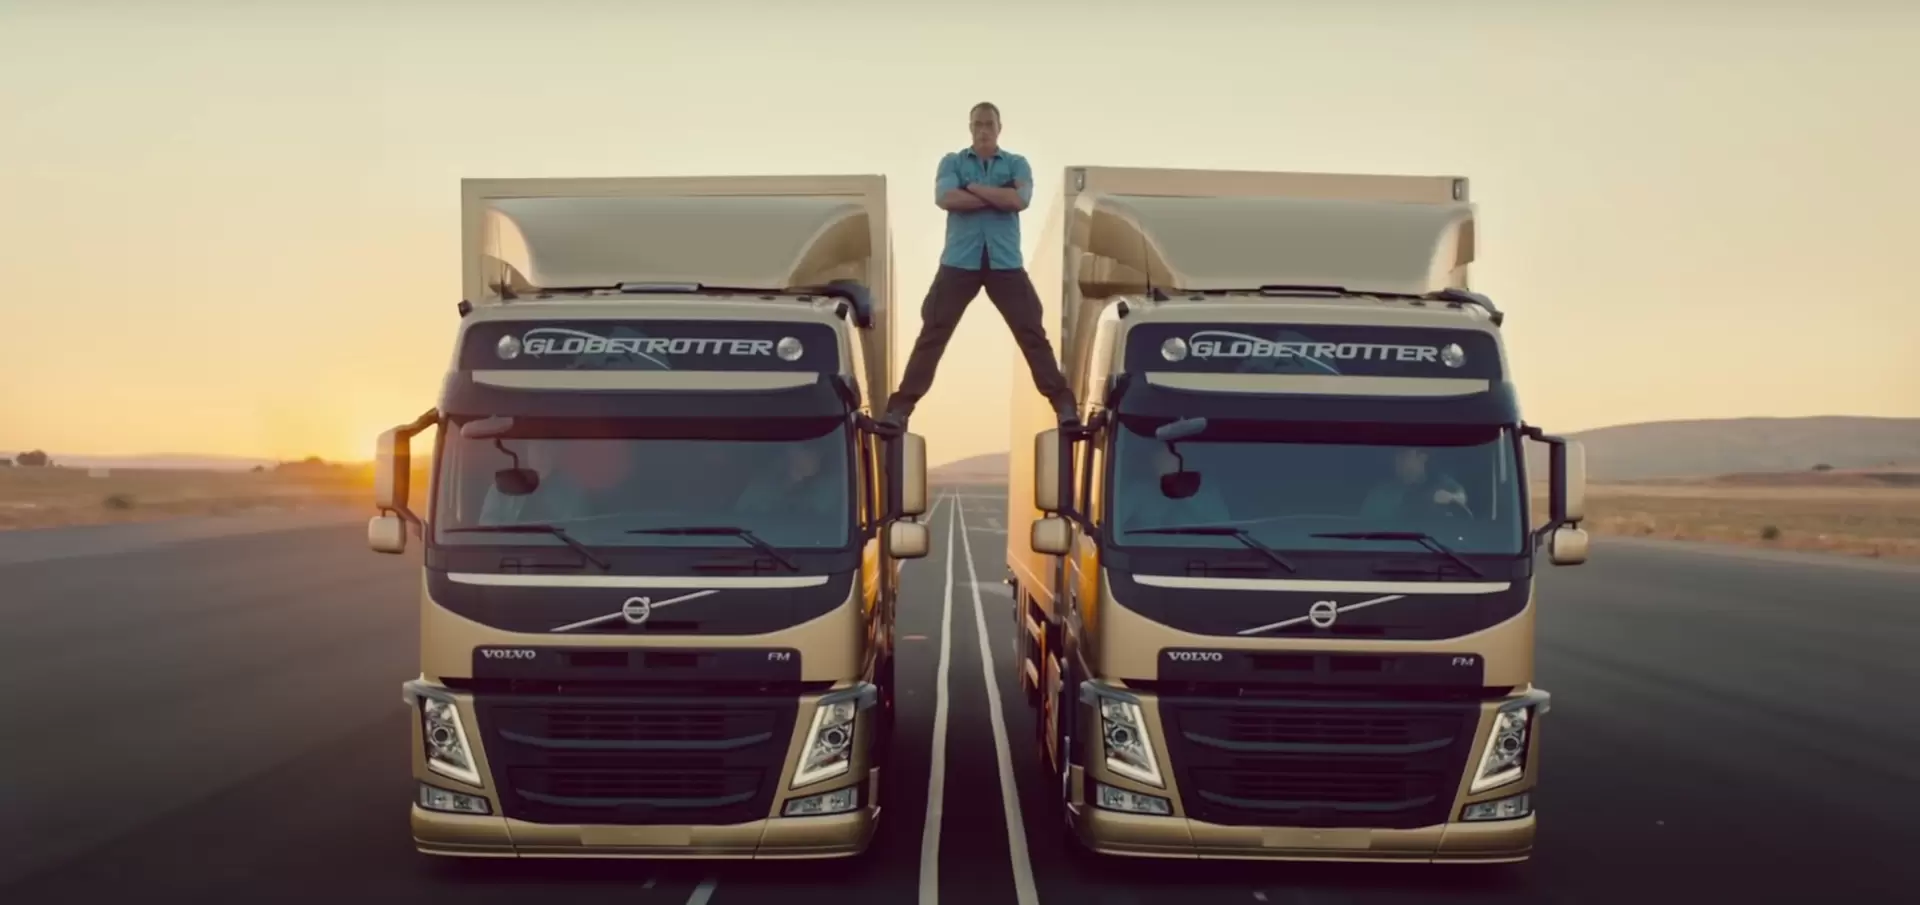 Creative advertisement with trucks by Volvo company